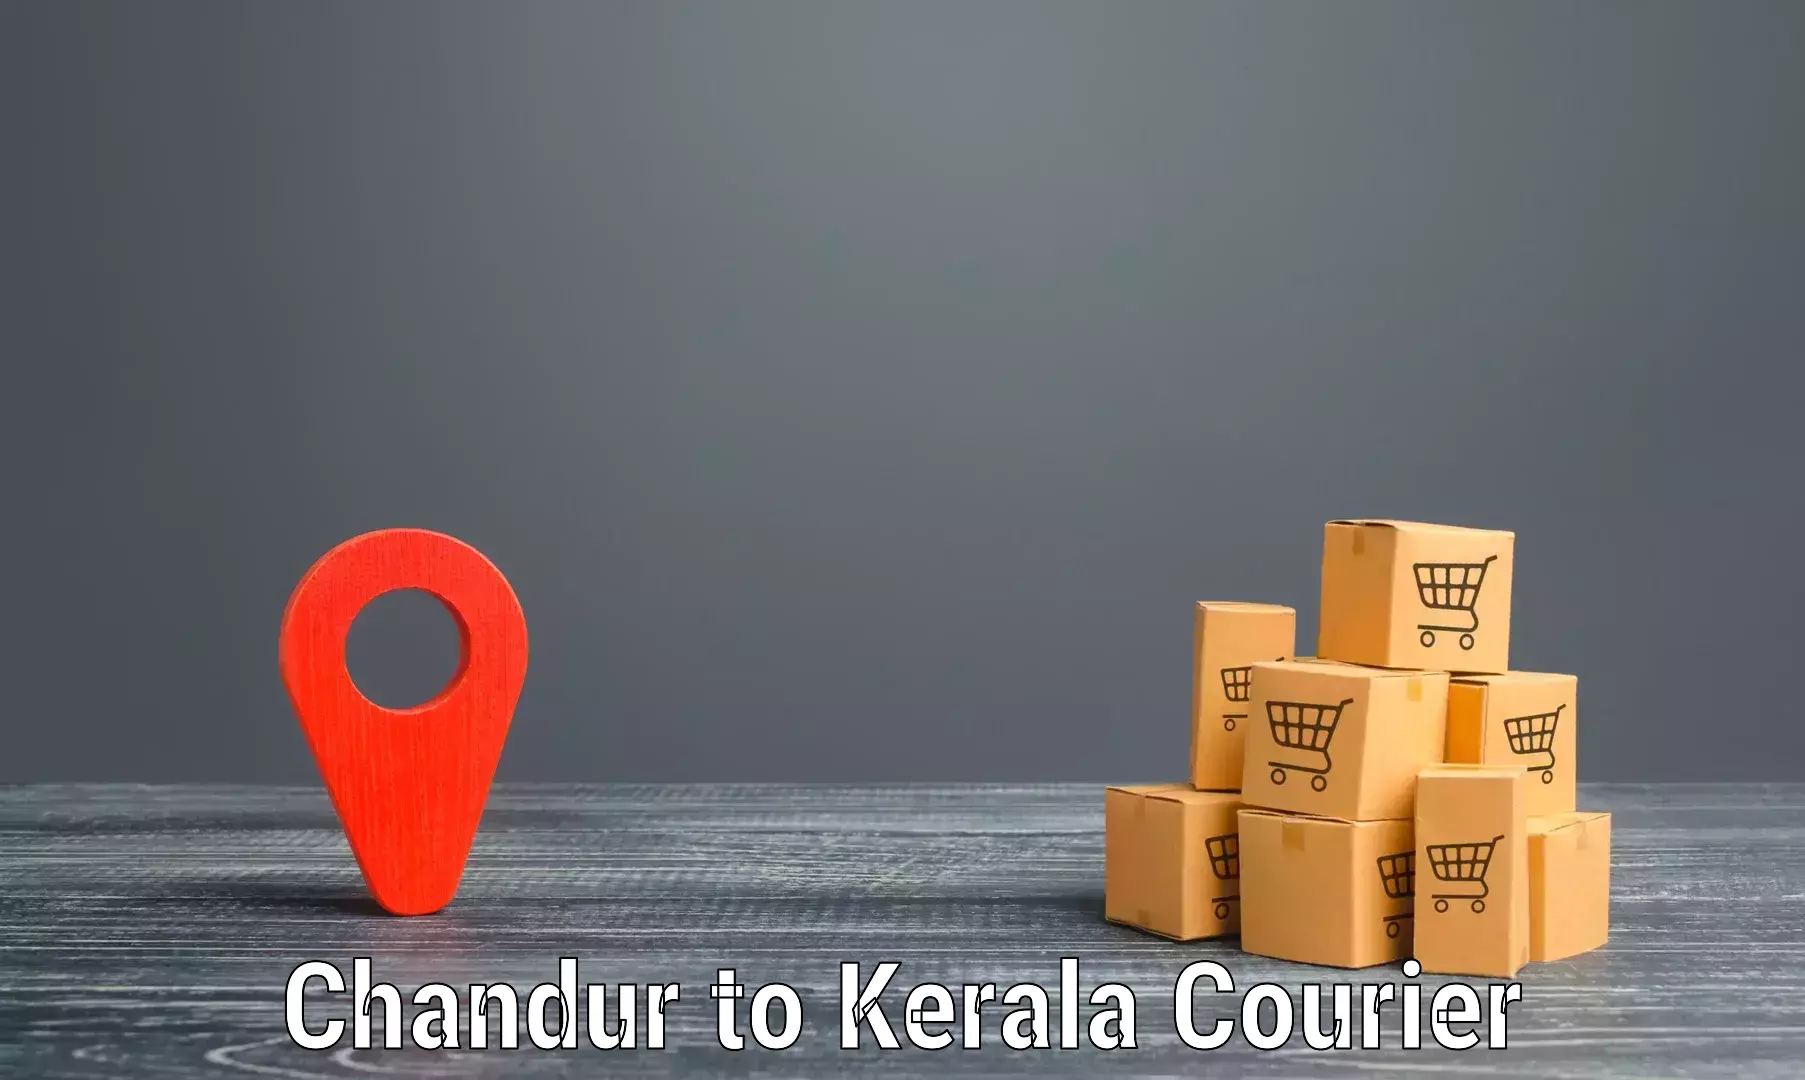 Express delivery network Chandur to Koothattukulam